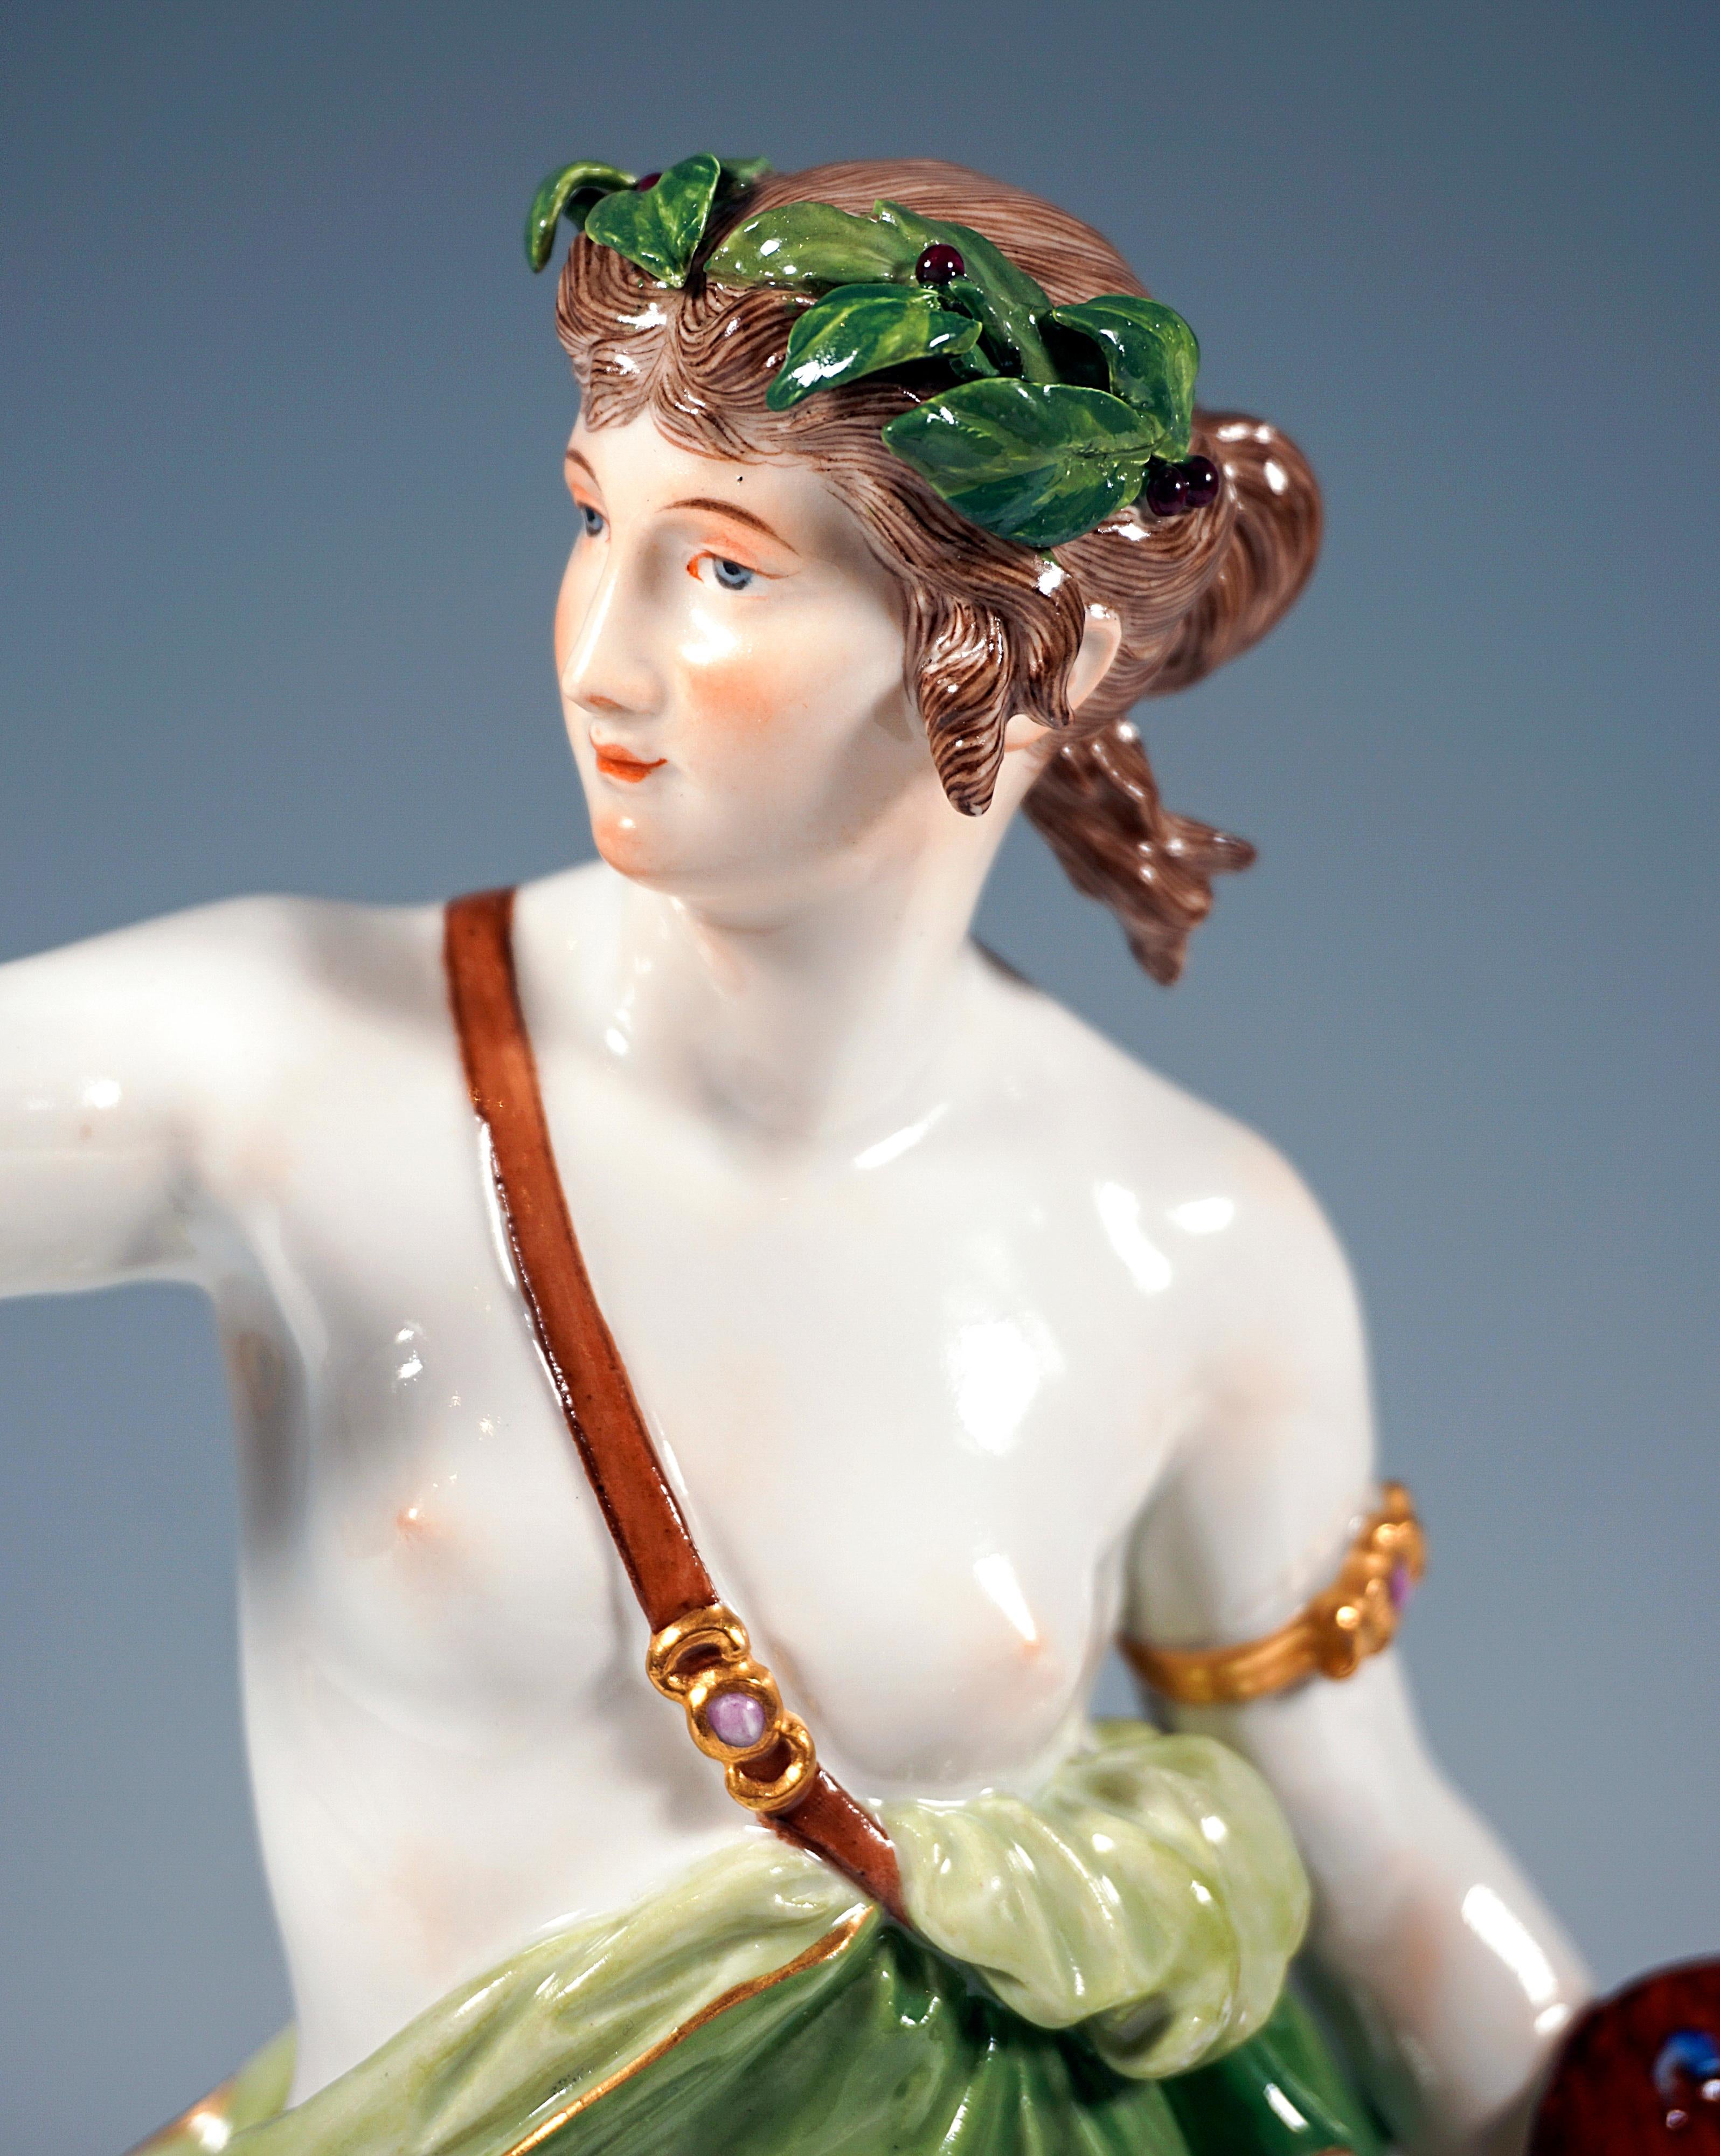 German Large Meissen Figurine Allegory 'The Painting' by Johann Christian Hirt, ca 1885 For Sale